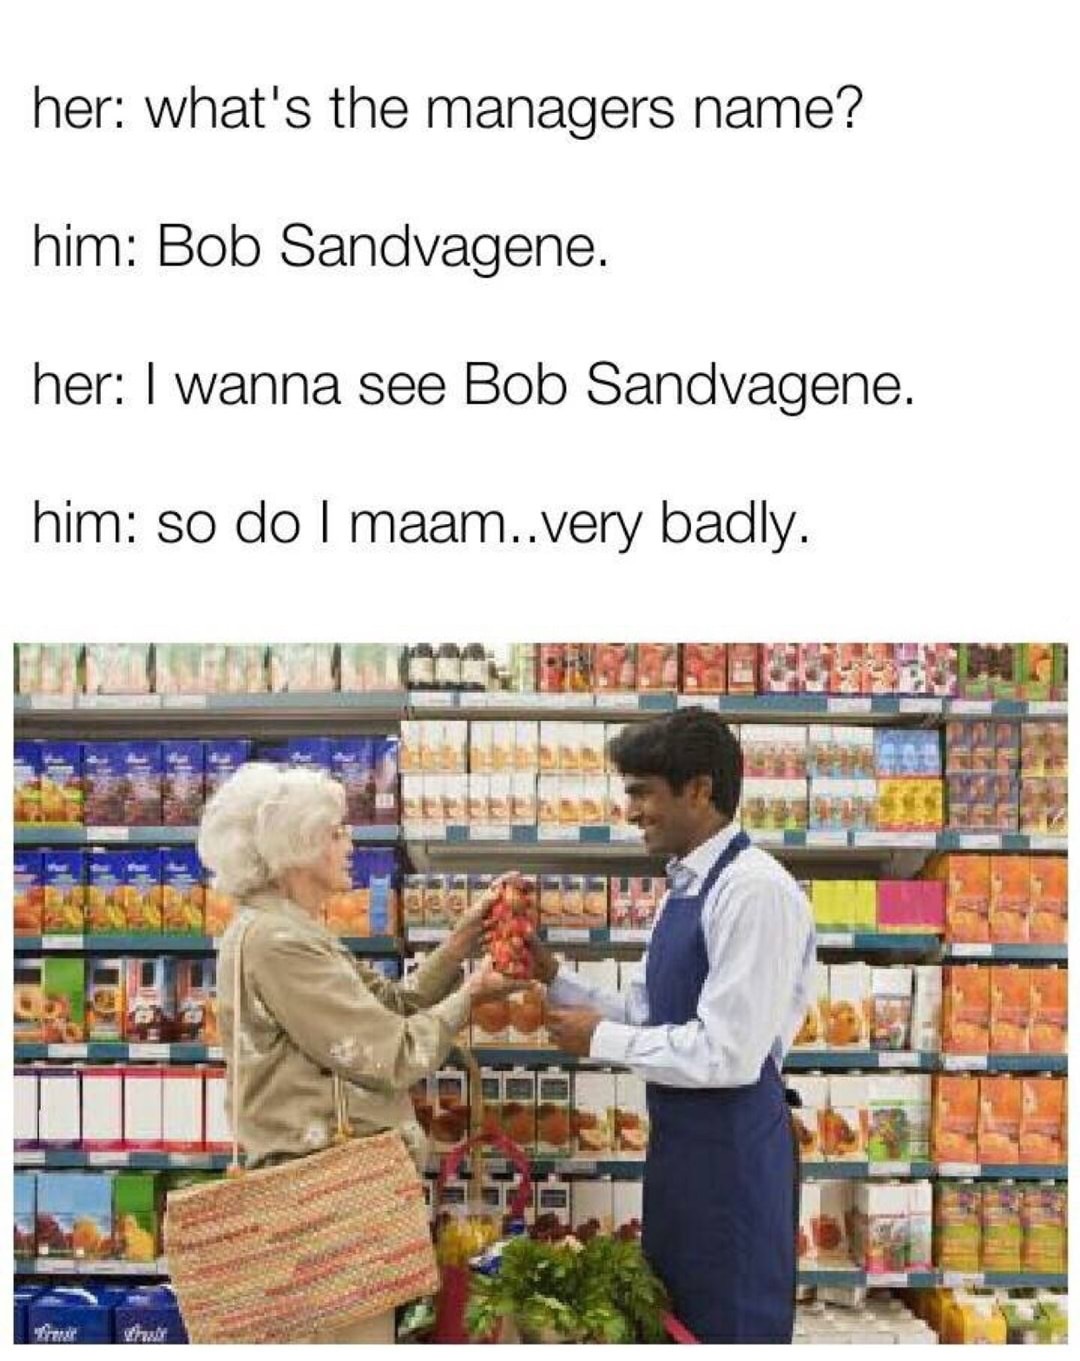 retailers definition - her what's the managers name? him Bob Sandvagene. her I wanna see Bob Sandvagene. him so do I maam..very badly.